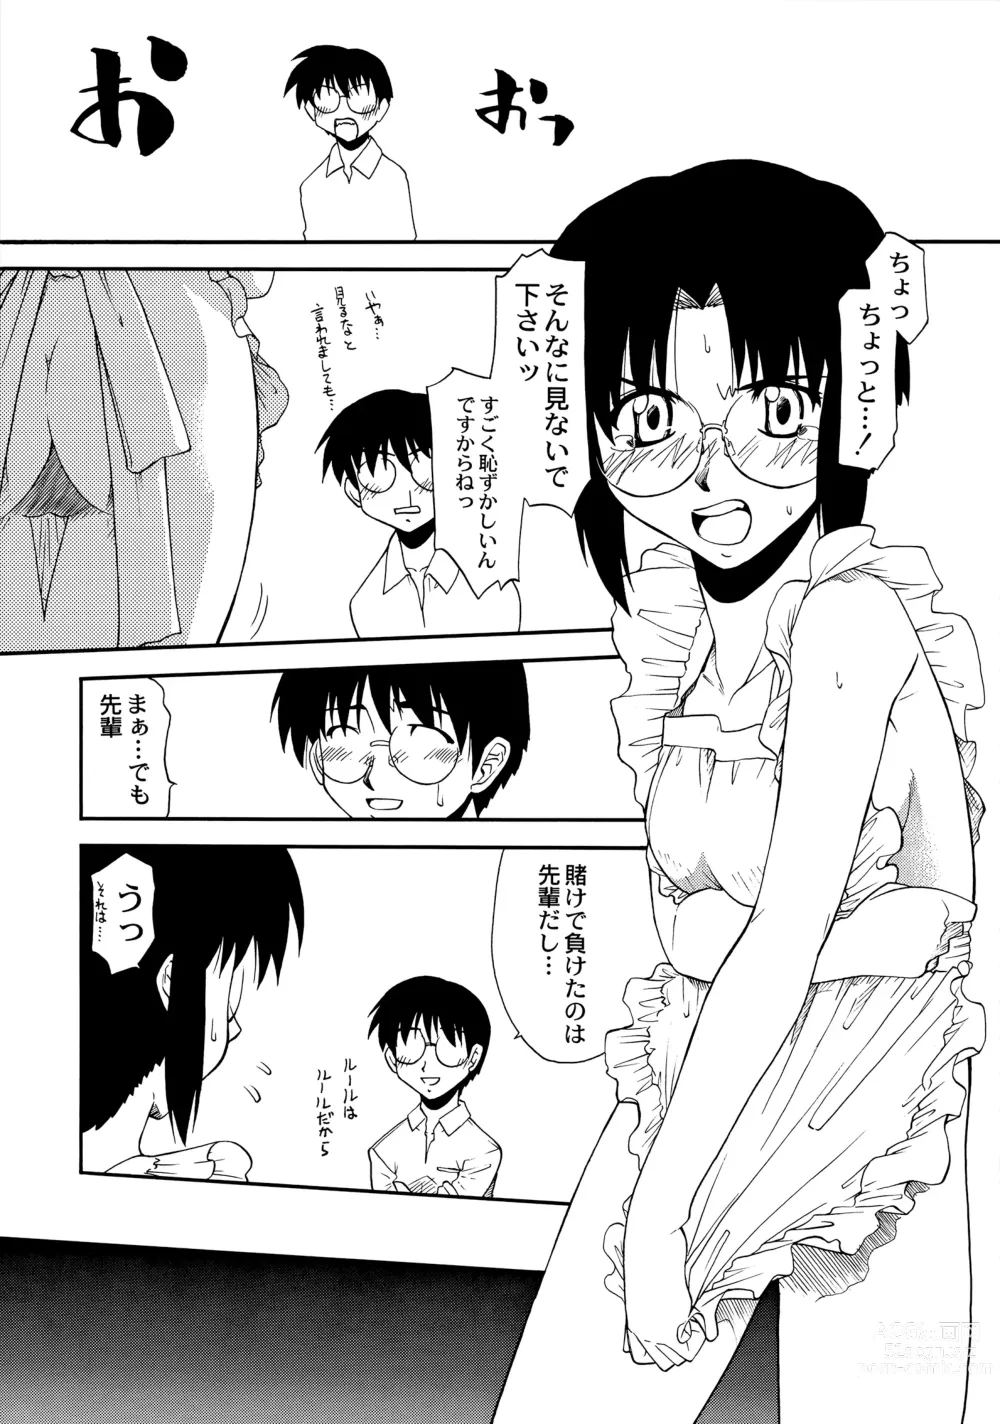 Page 4 of doujinshi Curry Rice no Onna